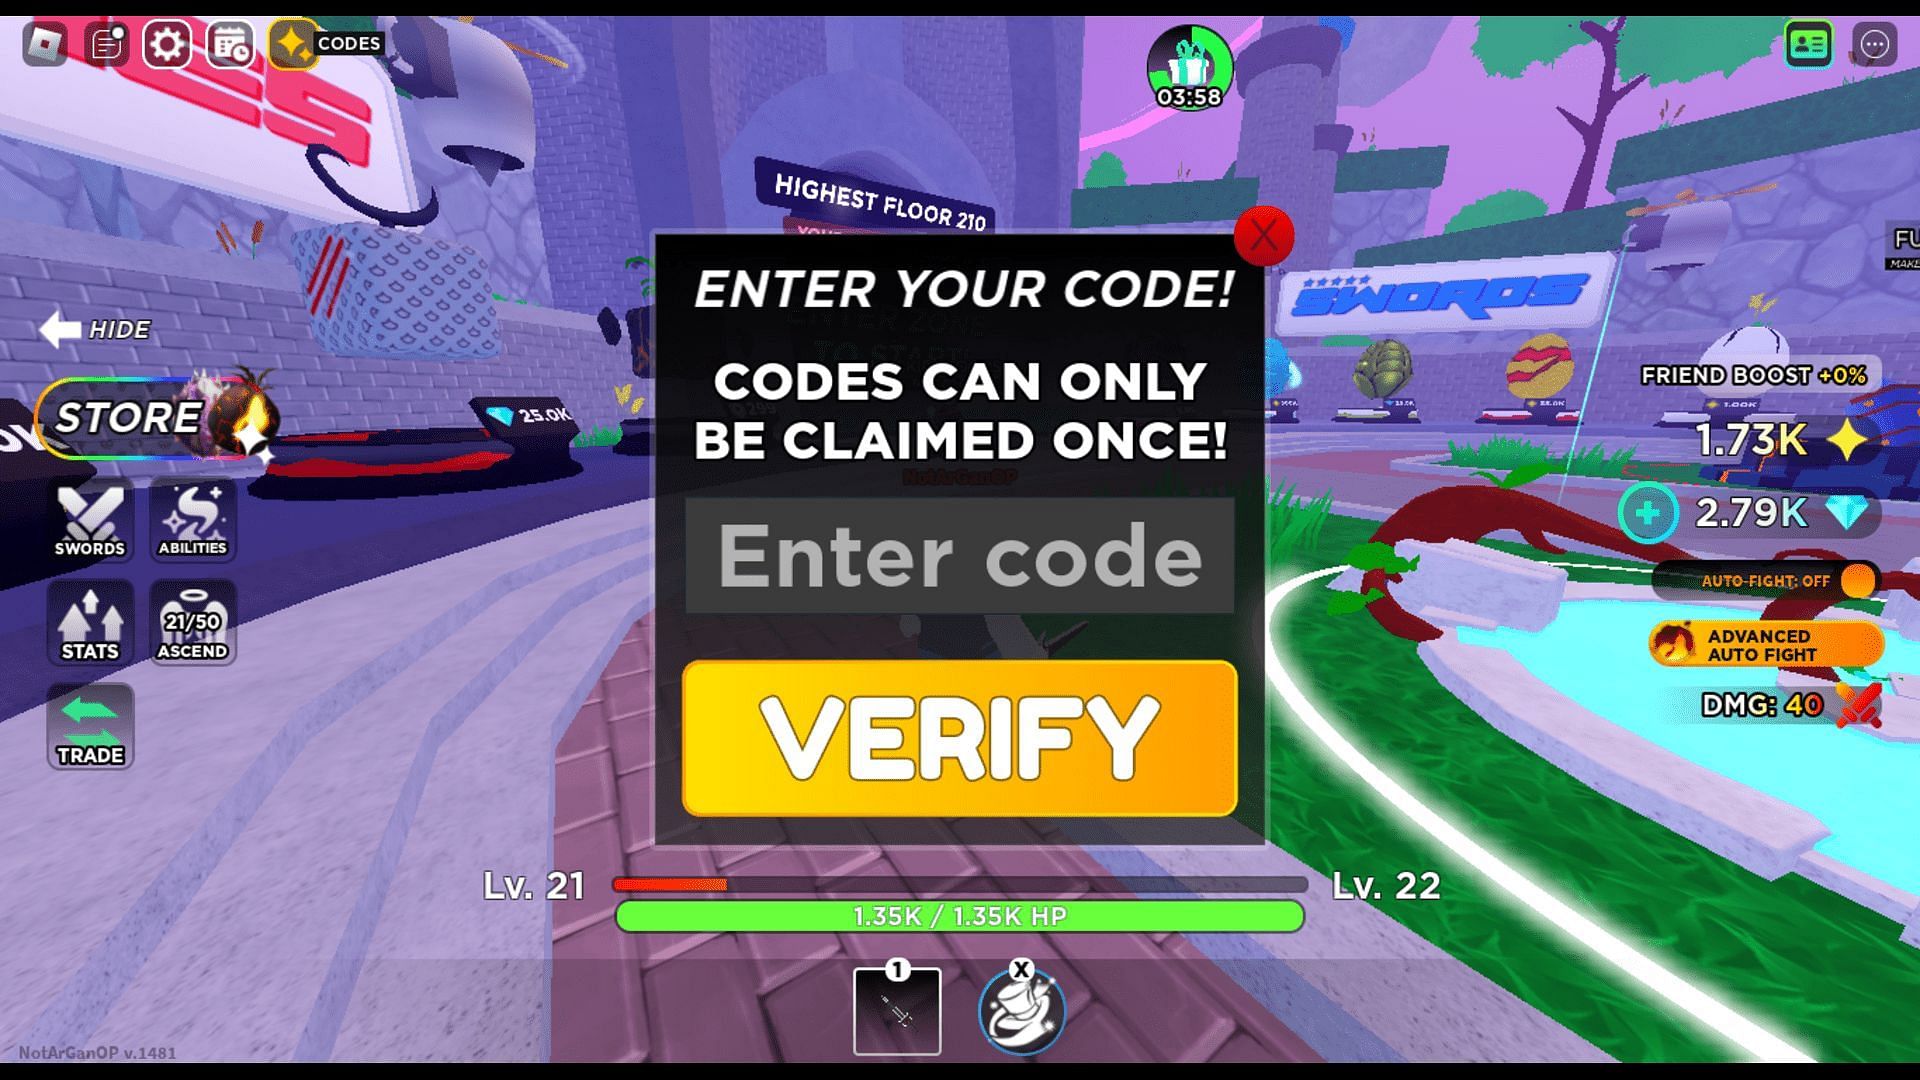 Redeem codes in Anime Battlegrounds Y with ease (Image via Roblox)